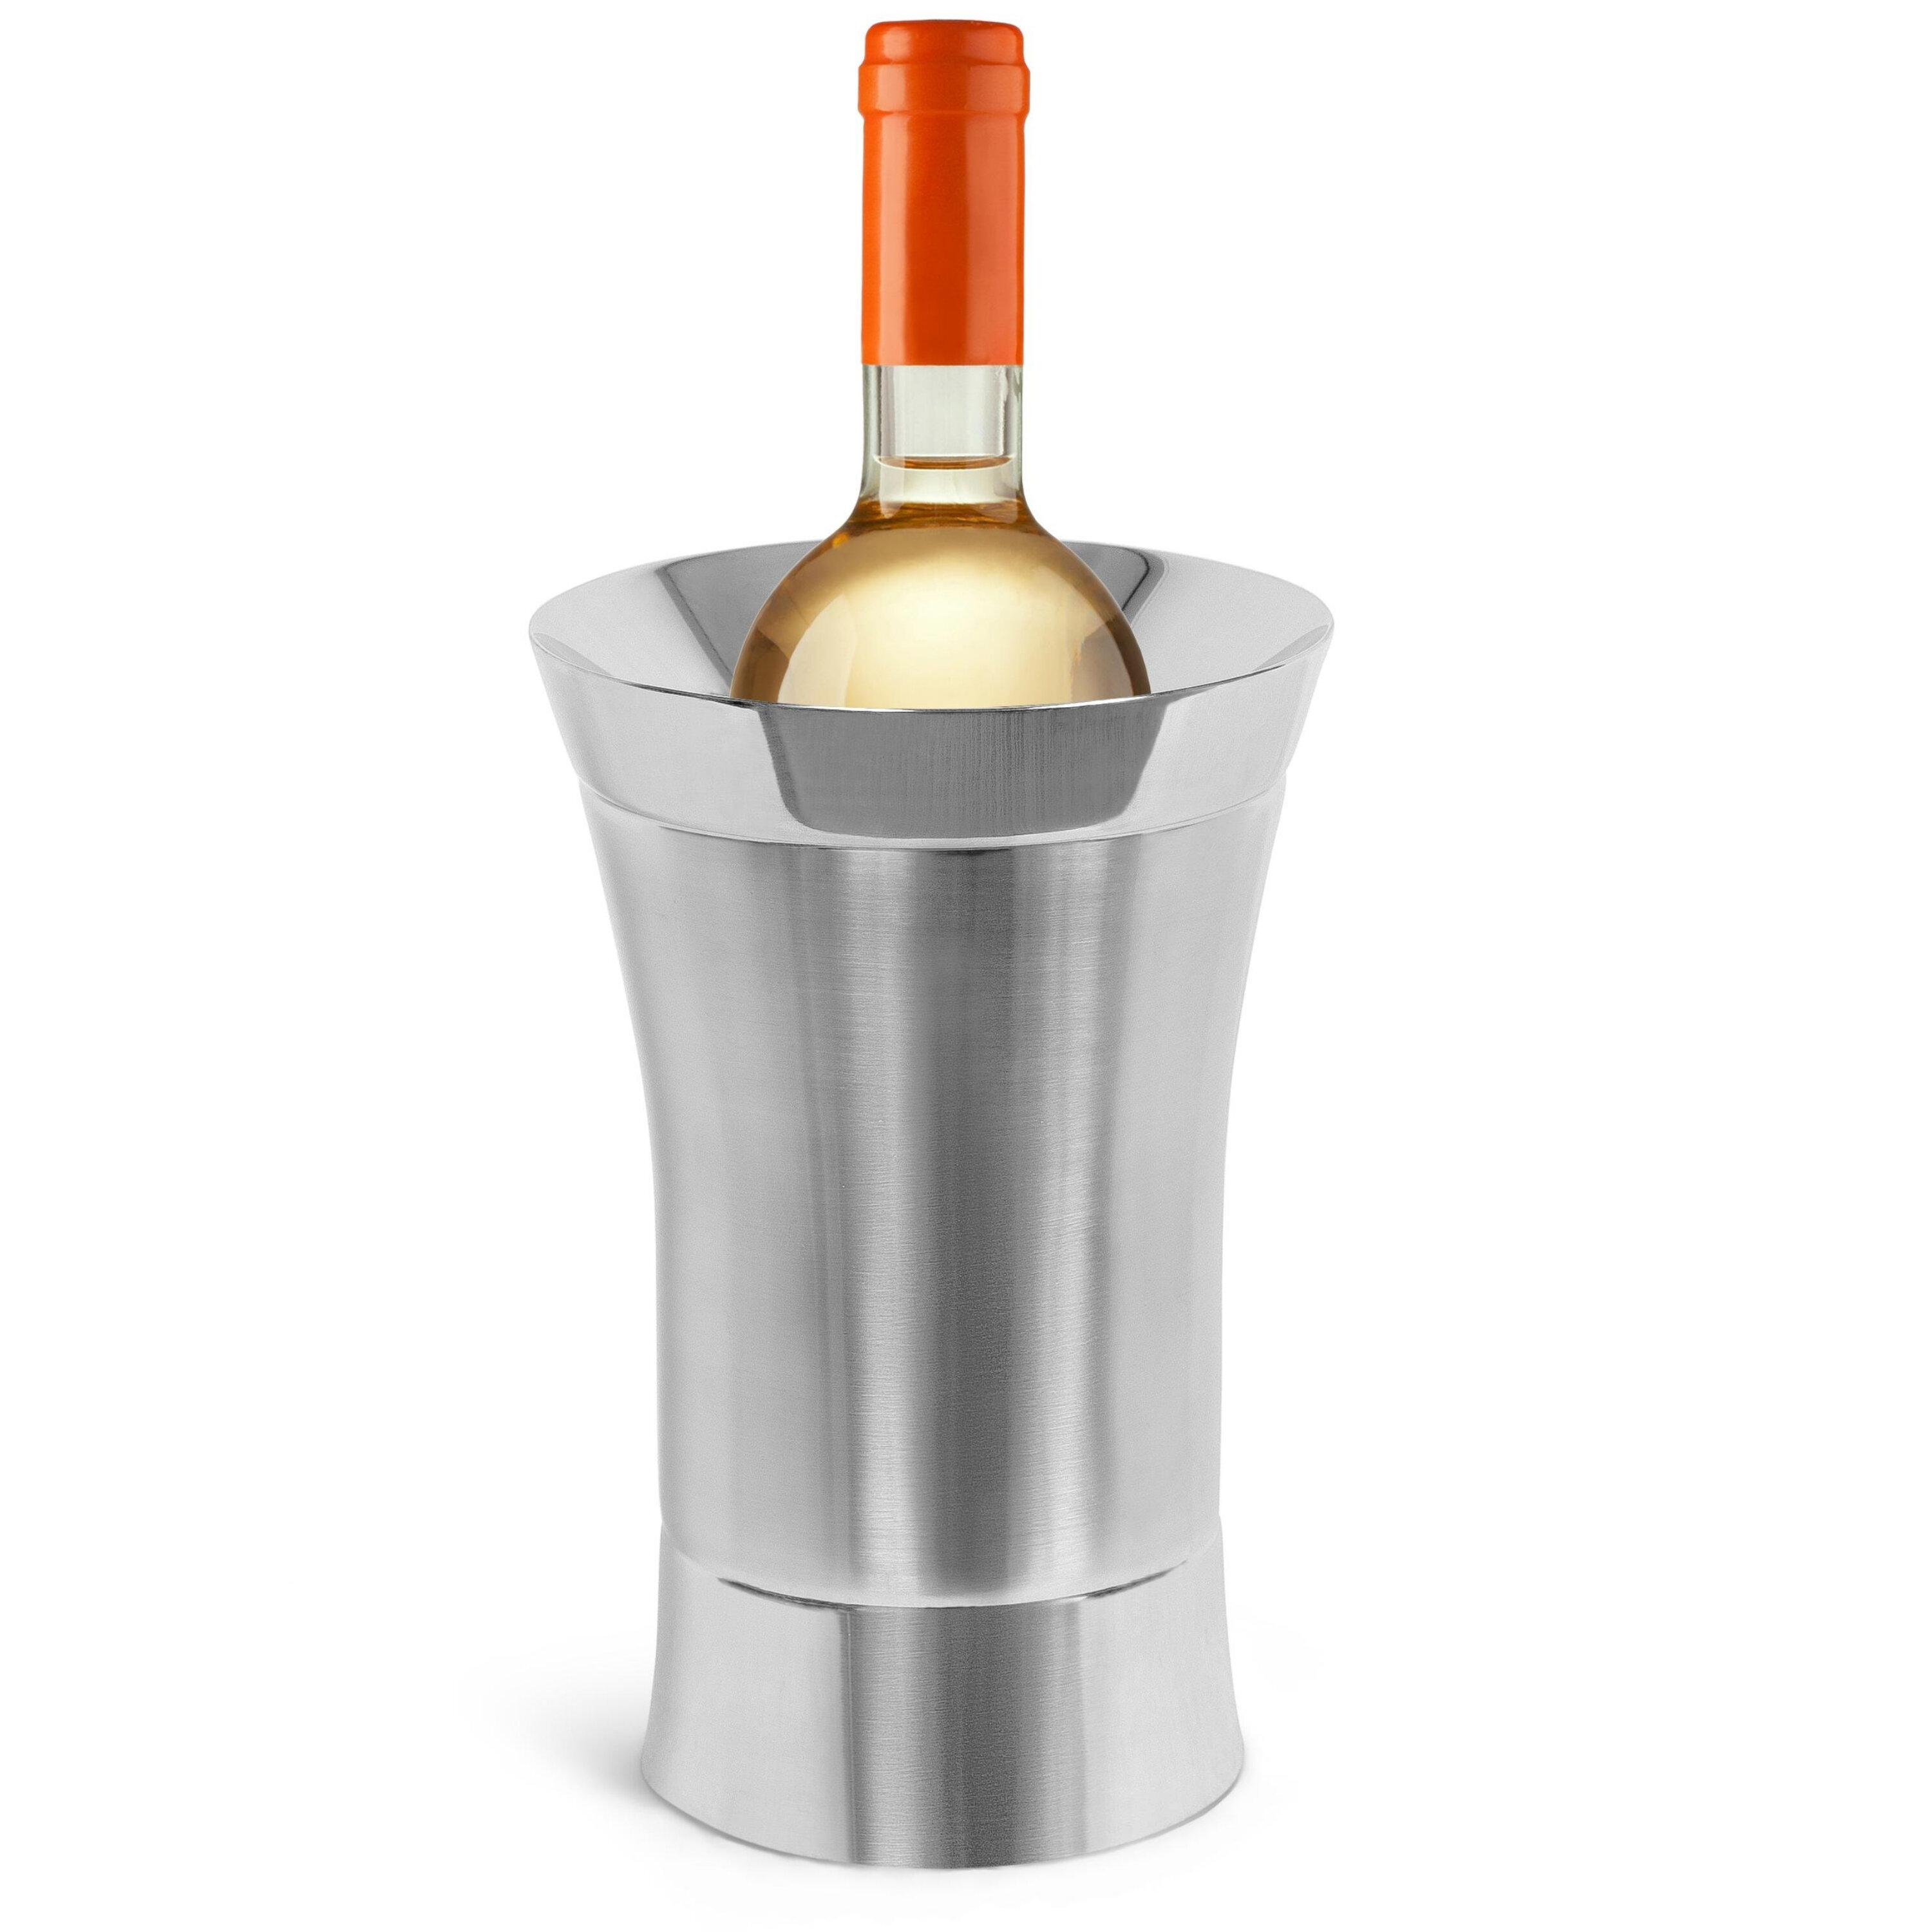 Double Wall Stainless Steel Brushed mDesign Wine Bottle Cooler/Chiller Bucket